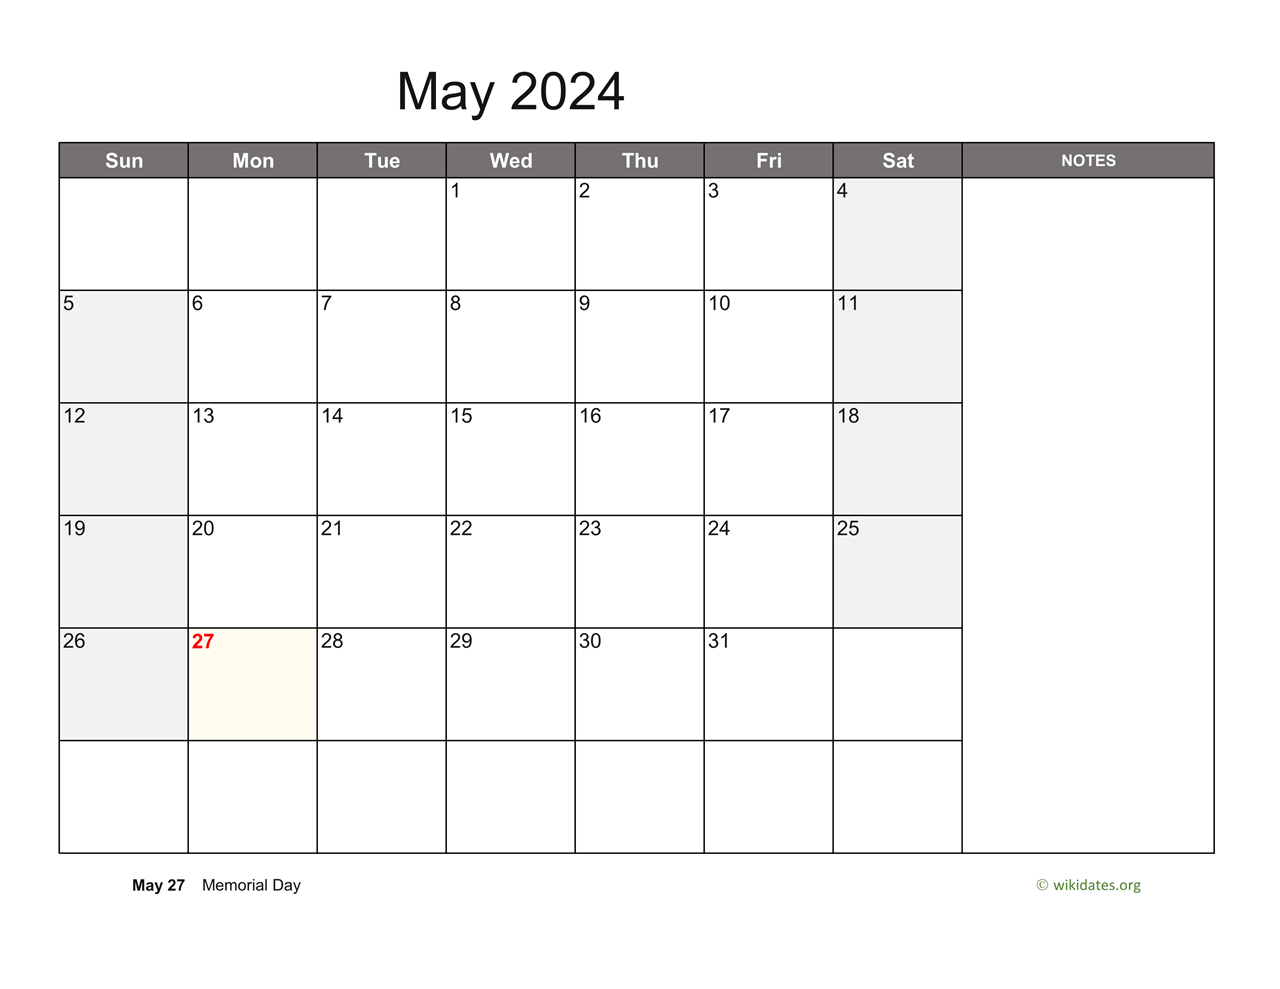 May 2024 Calendar with Notes WikiDates org